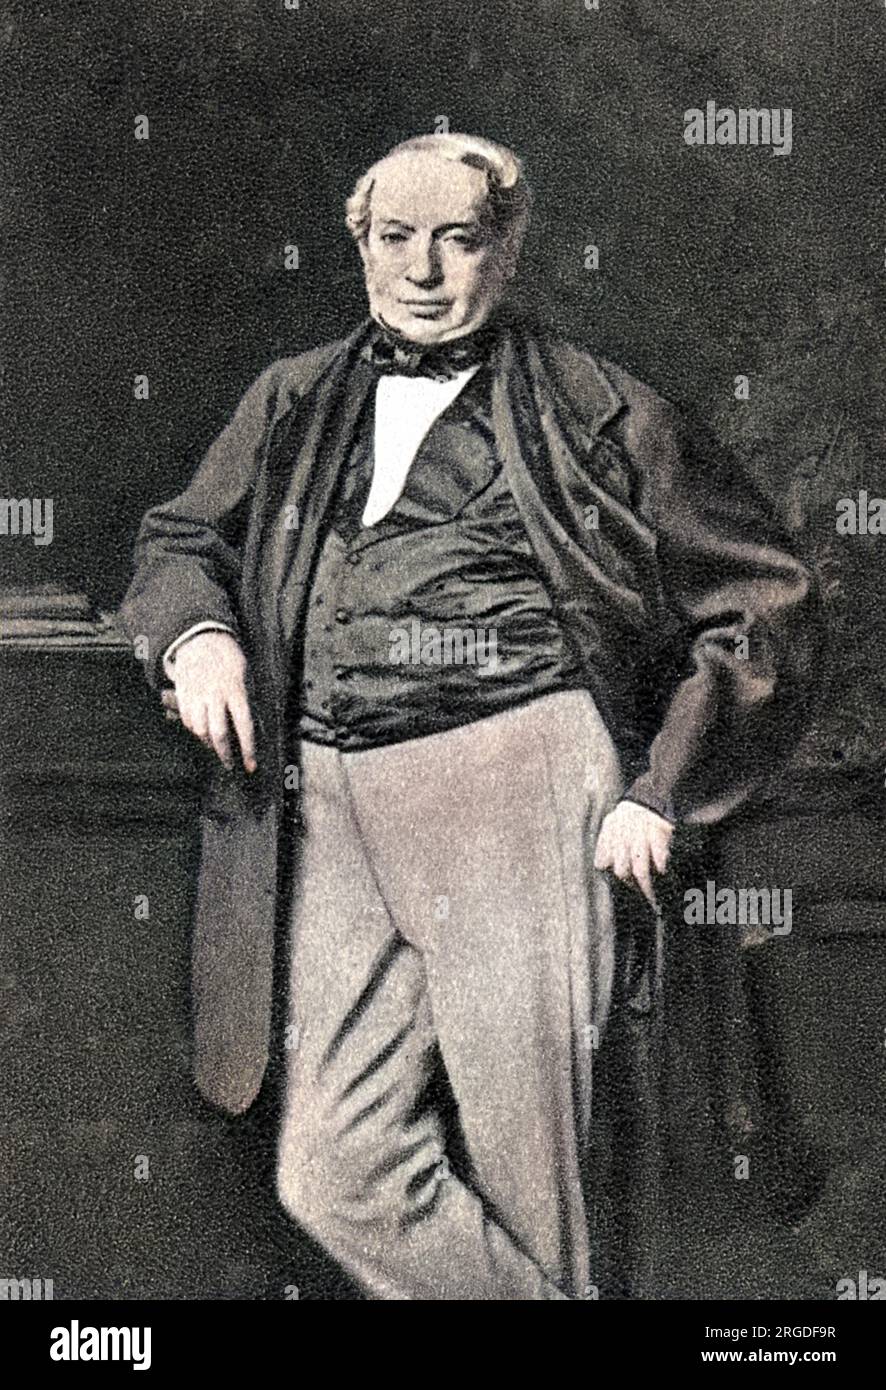 Baron JAMES DE ROTHSCHILD son of Mayer R., founder of the French branch of the banking family, photographed in 1867. Stock Photo